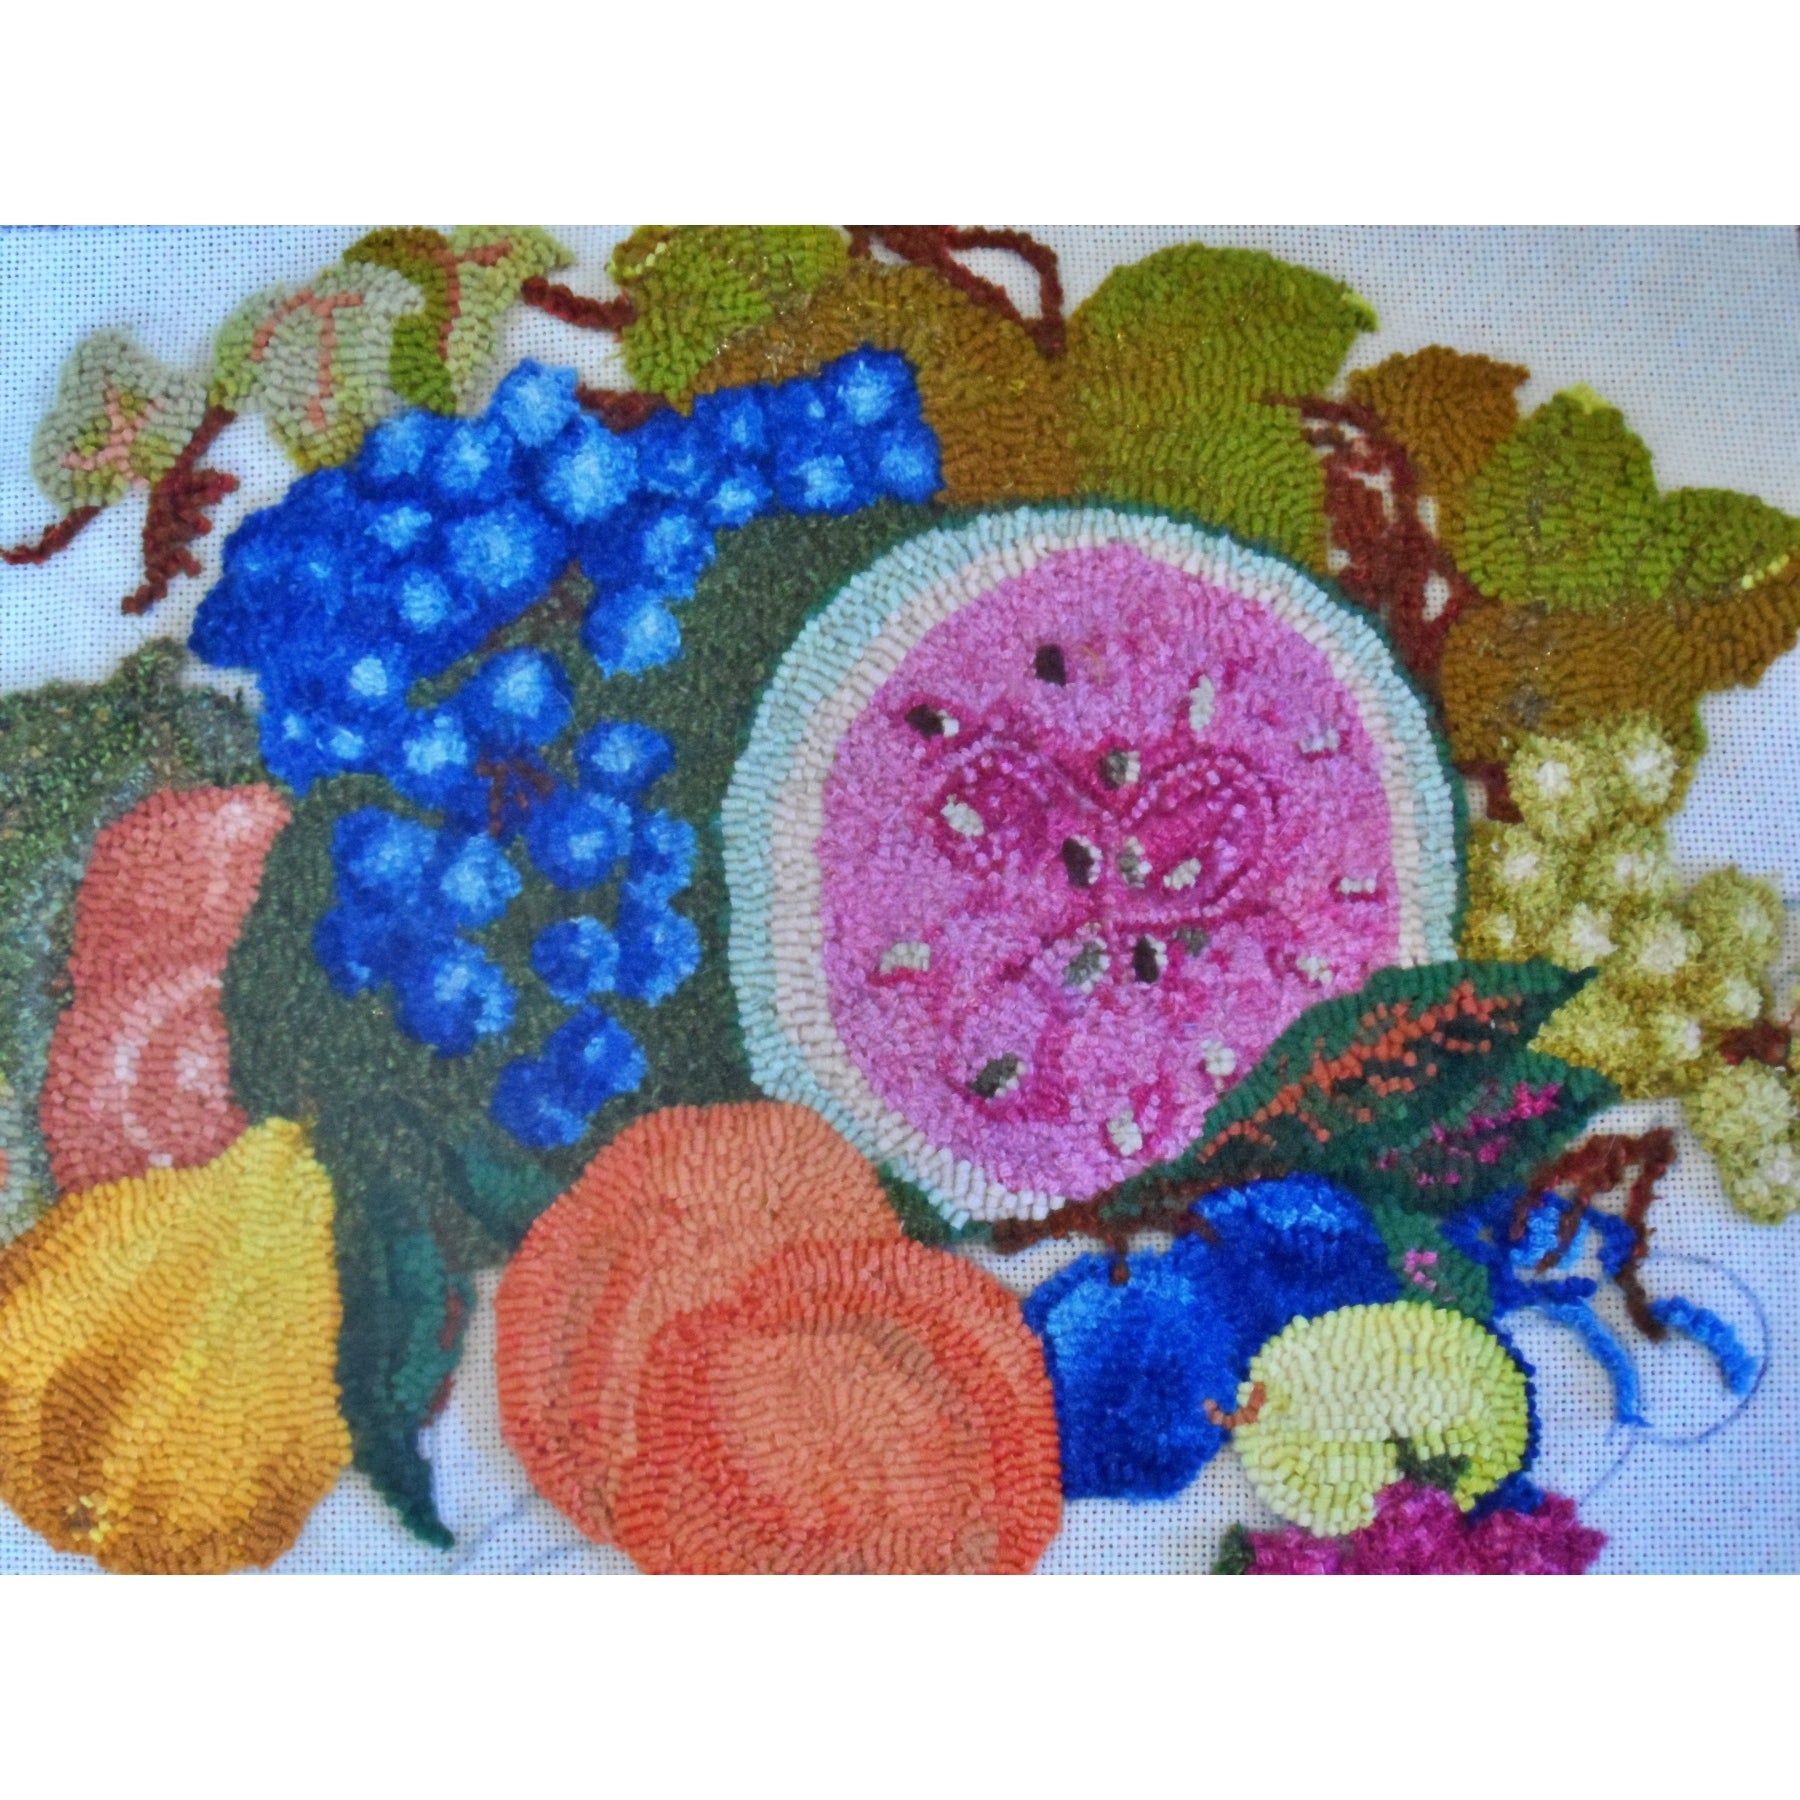 Autumn Fruit, rug hooked by Janet Williams